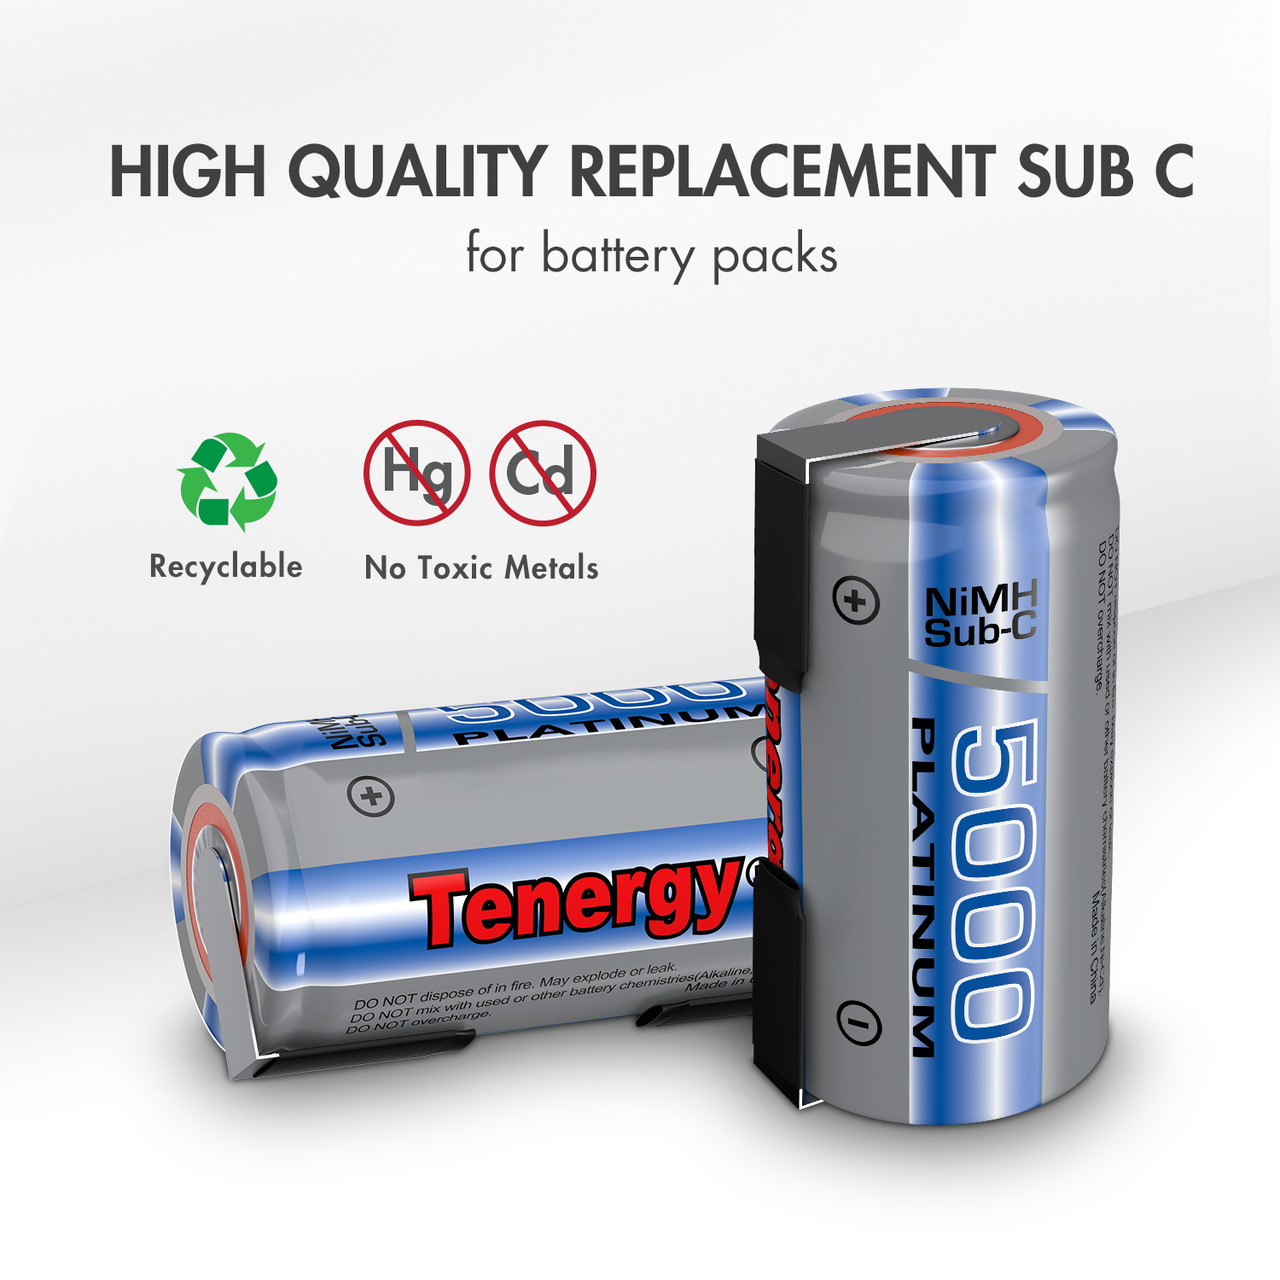 Combo: 10pcs of Tenergy NiMH SubC 5000mAh Flat Top Rechargeable Battery (with Tabs)